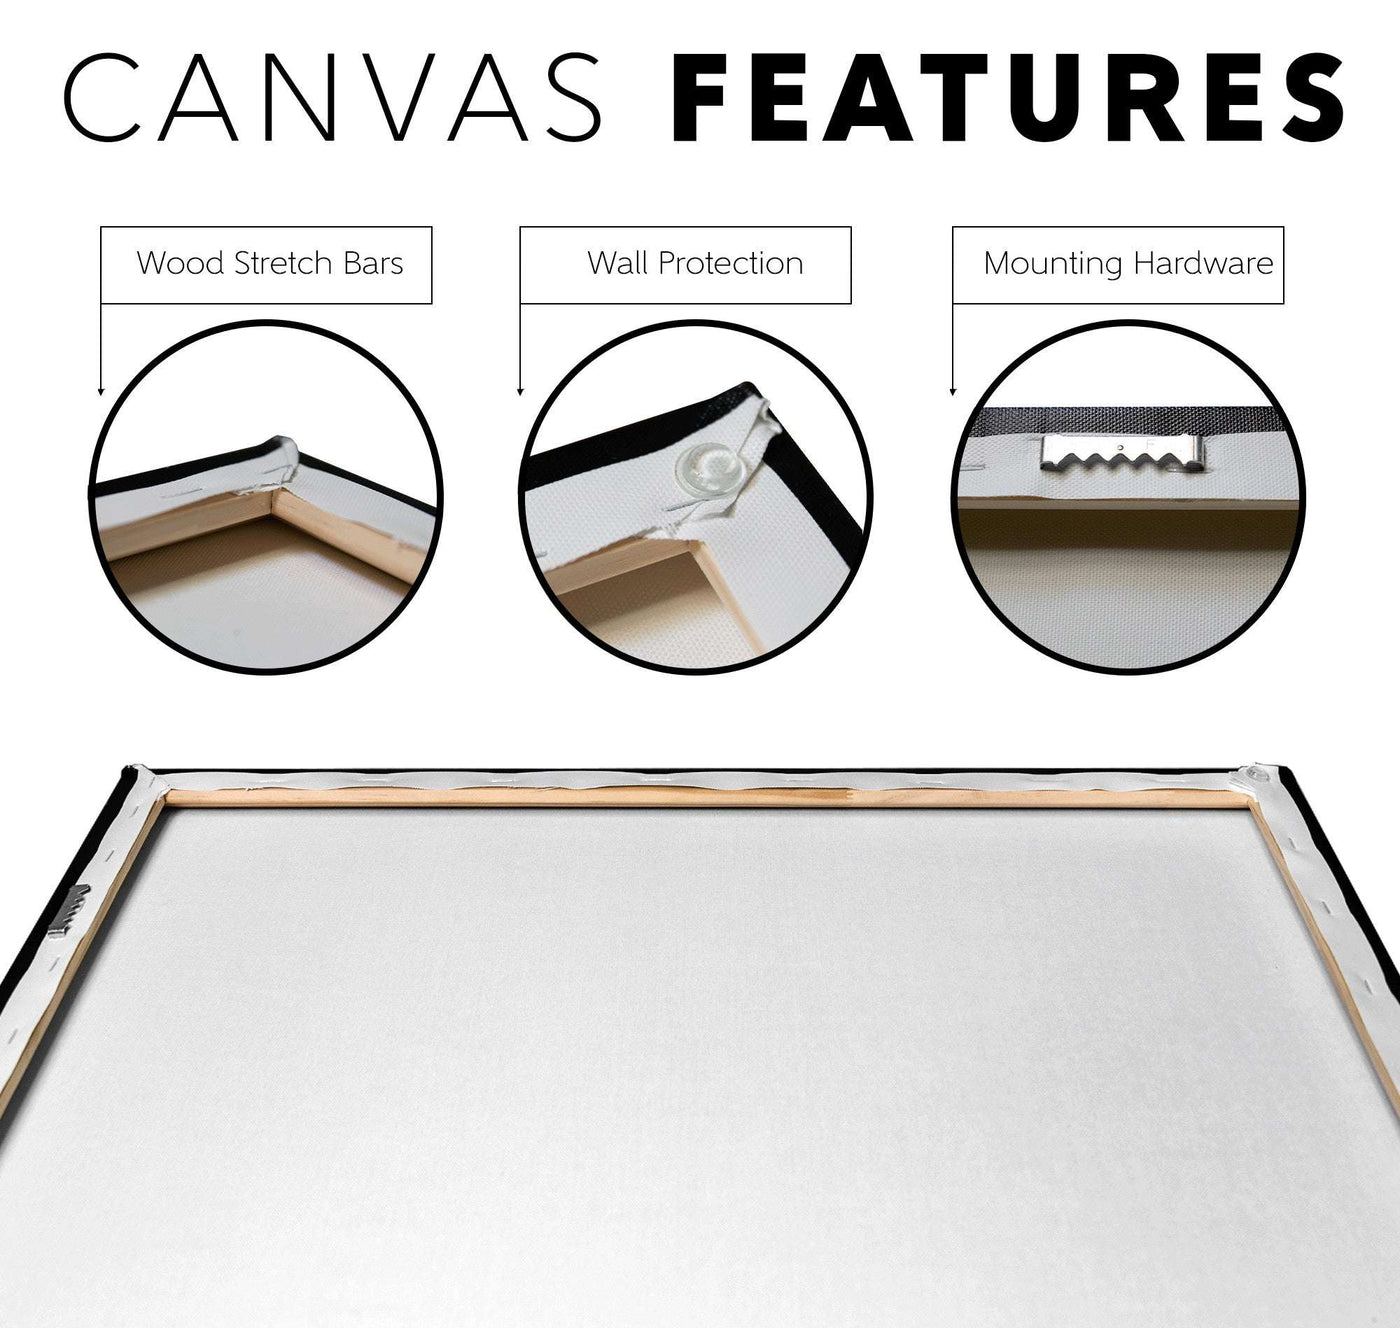 Infographic showing features of a Ferret Flight Canvas Print: wood stretch bars, wall protection, and mounting hardware, with close-up images of each component.